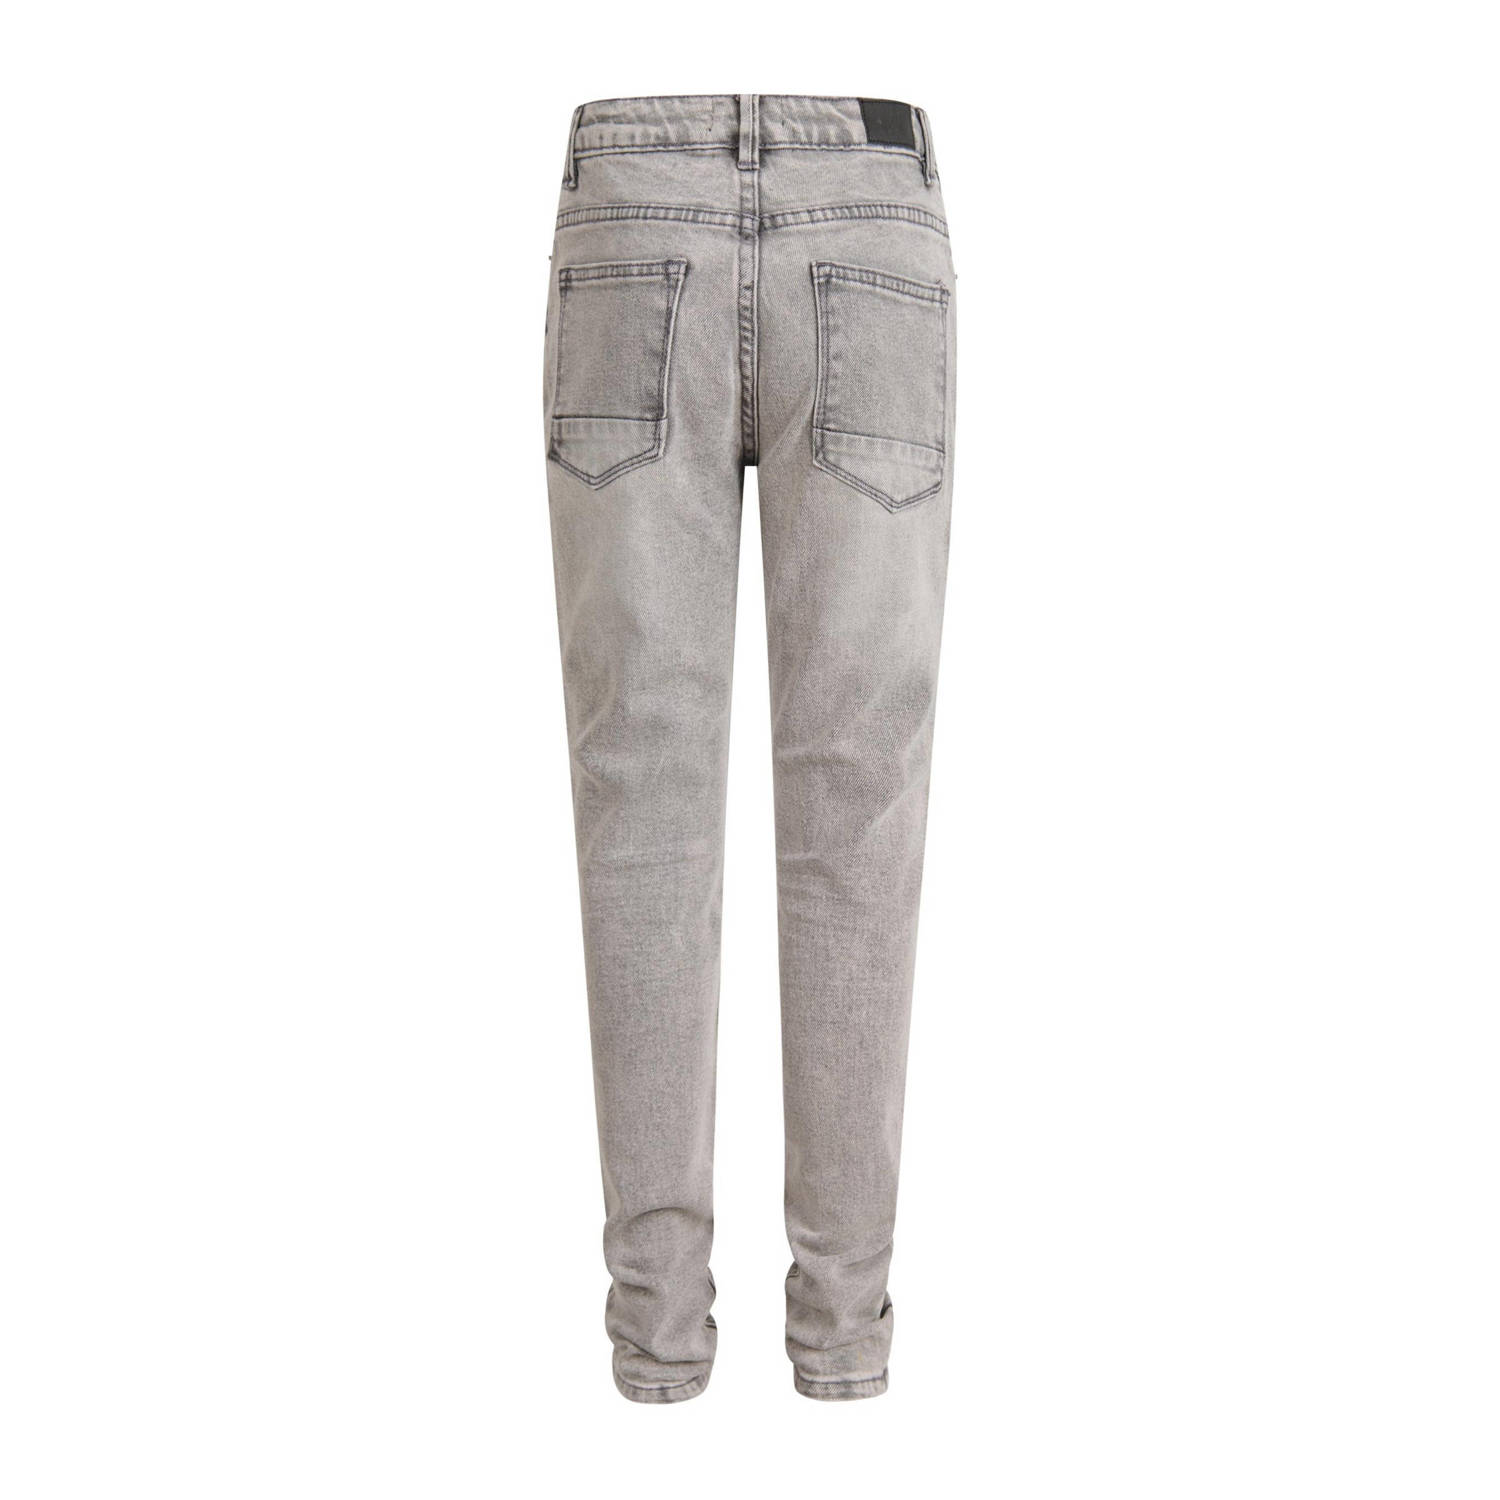 Shoeby tapered fit jeans grey denim